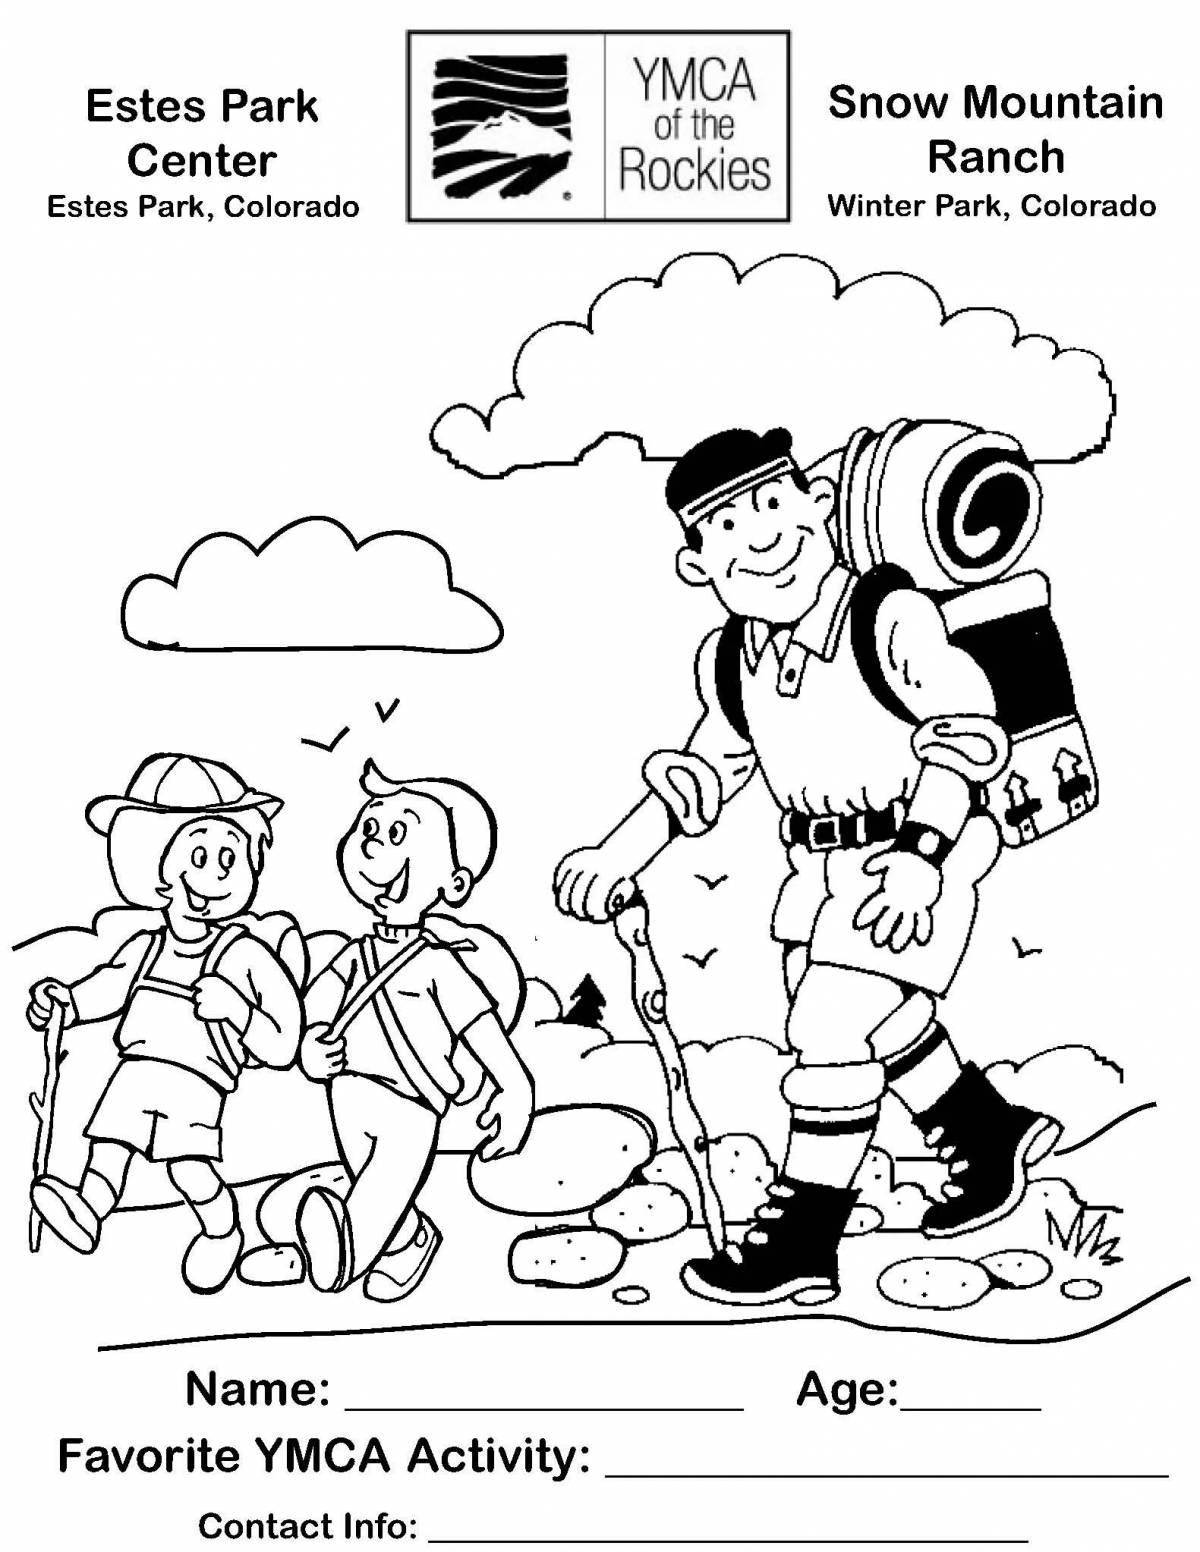 Coloring page energetic tourist